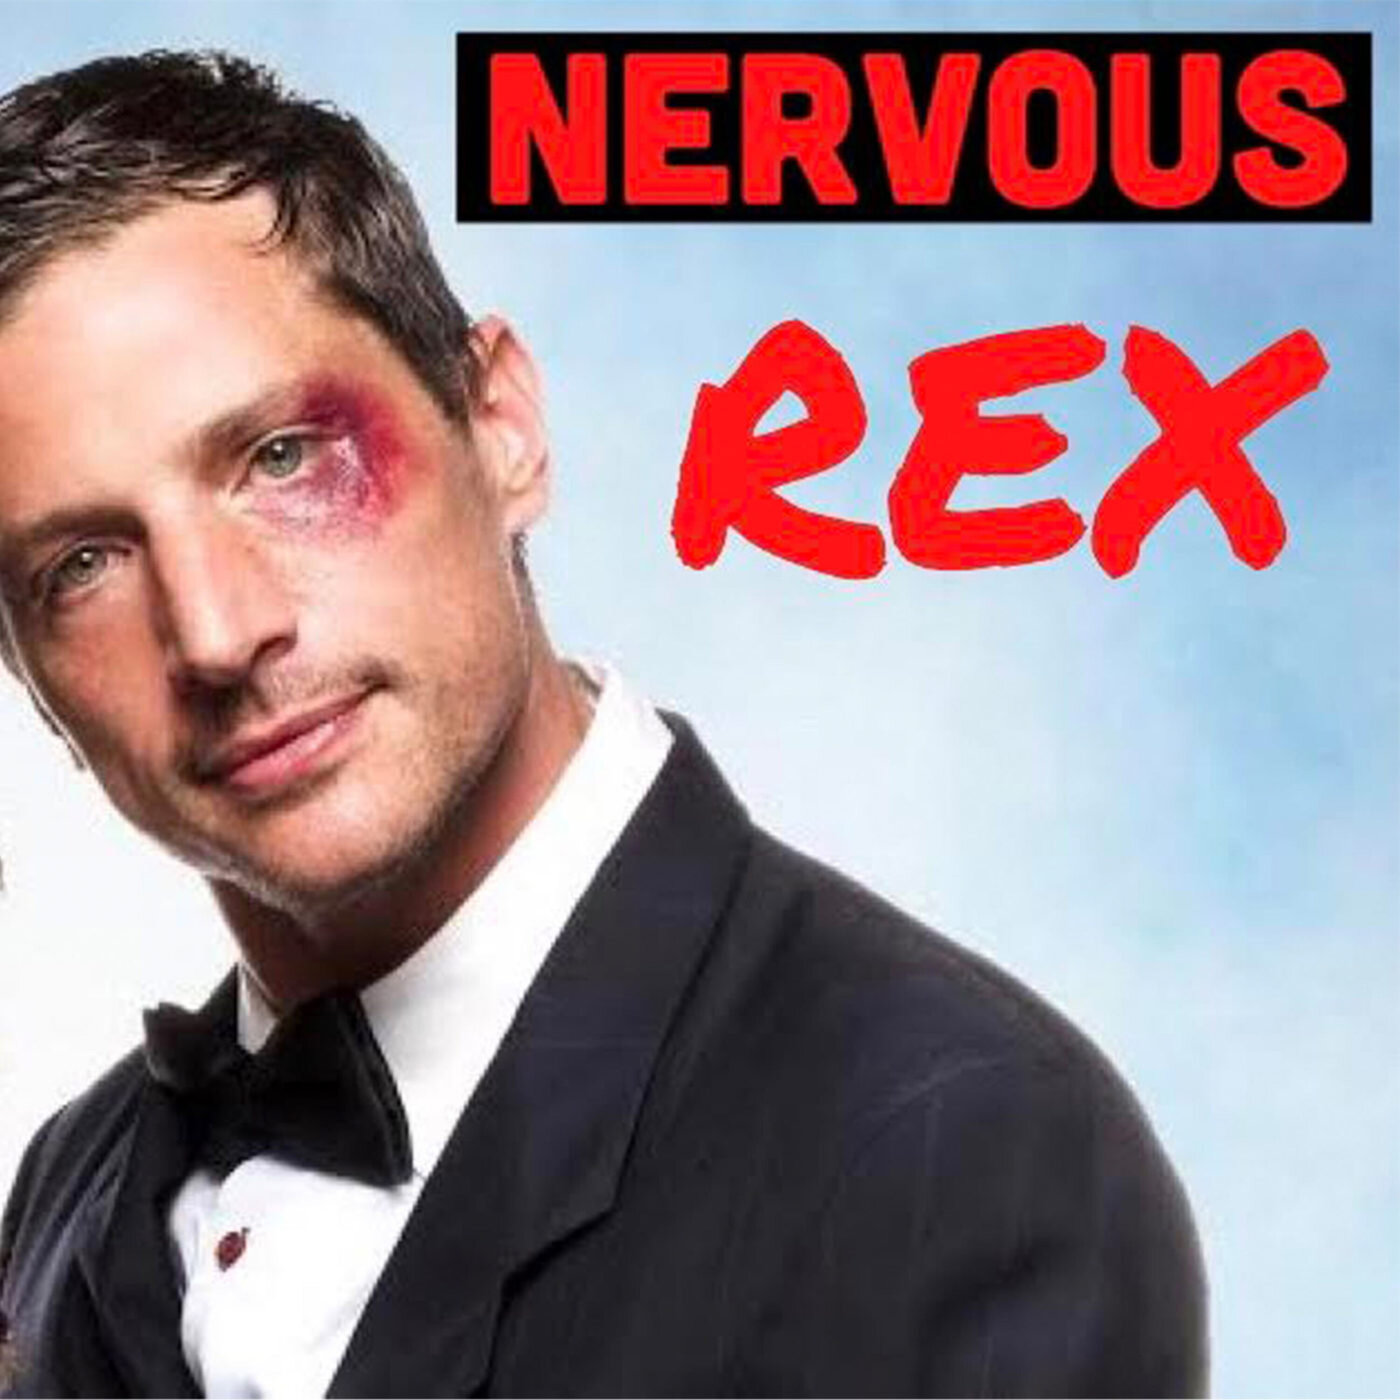 Welcome to Nervous Rex!